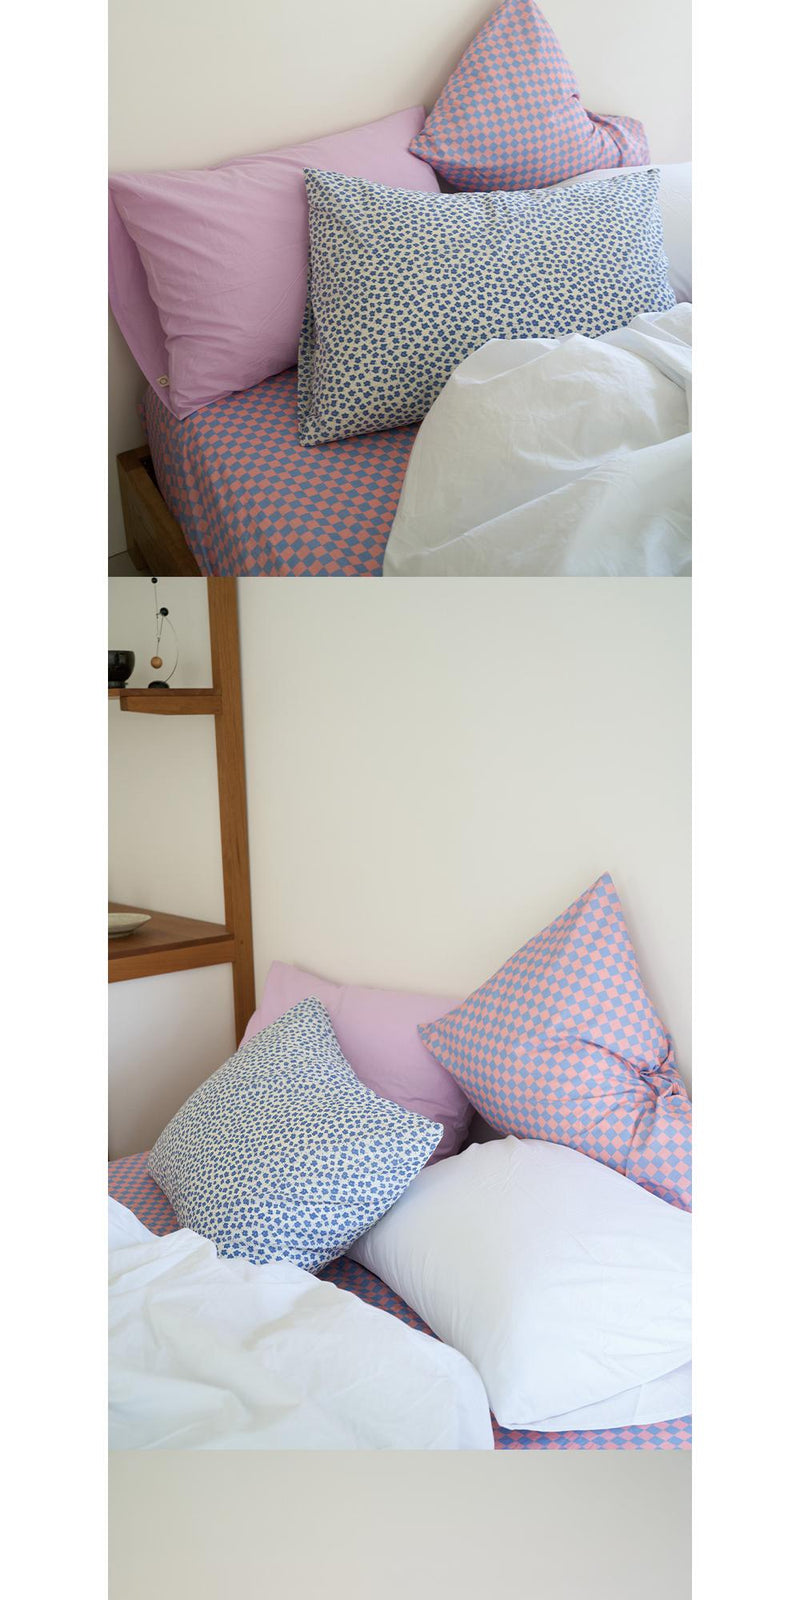 Two-tone Checkers Pillow Cover